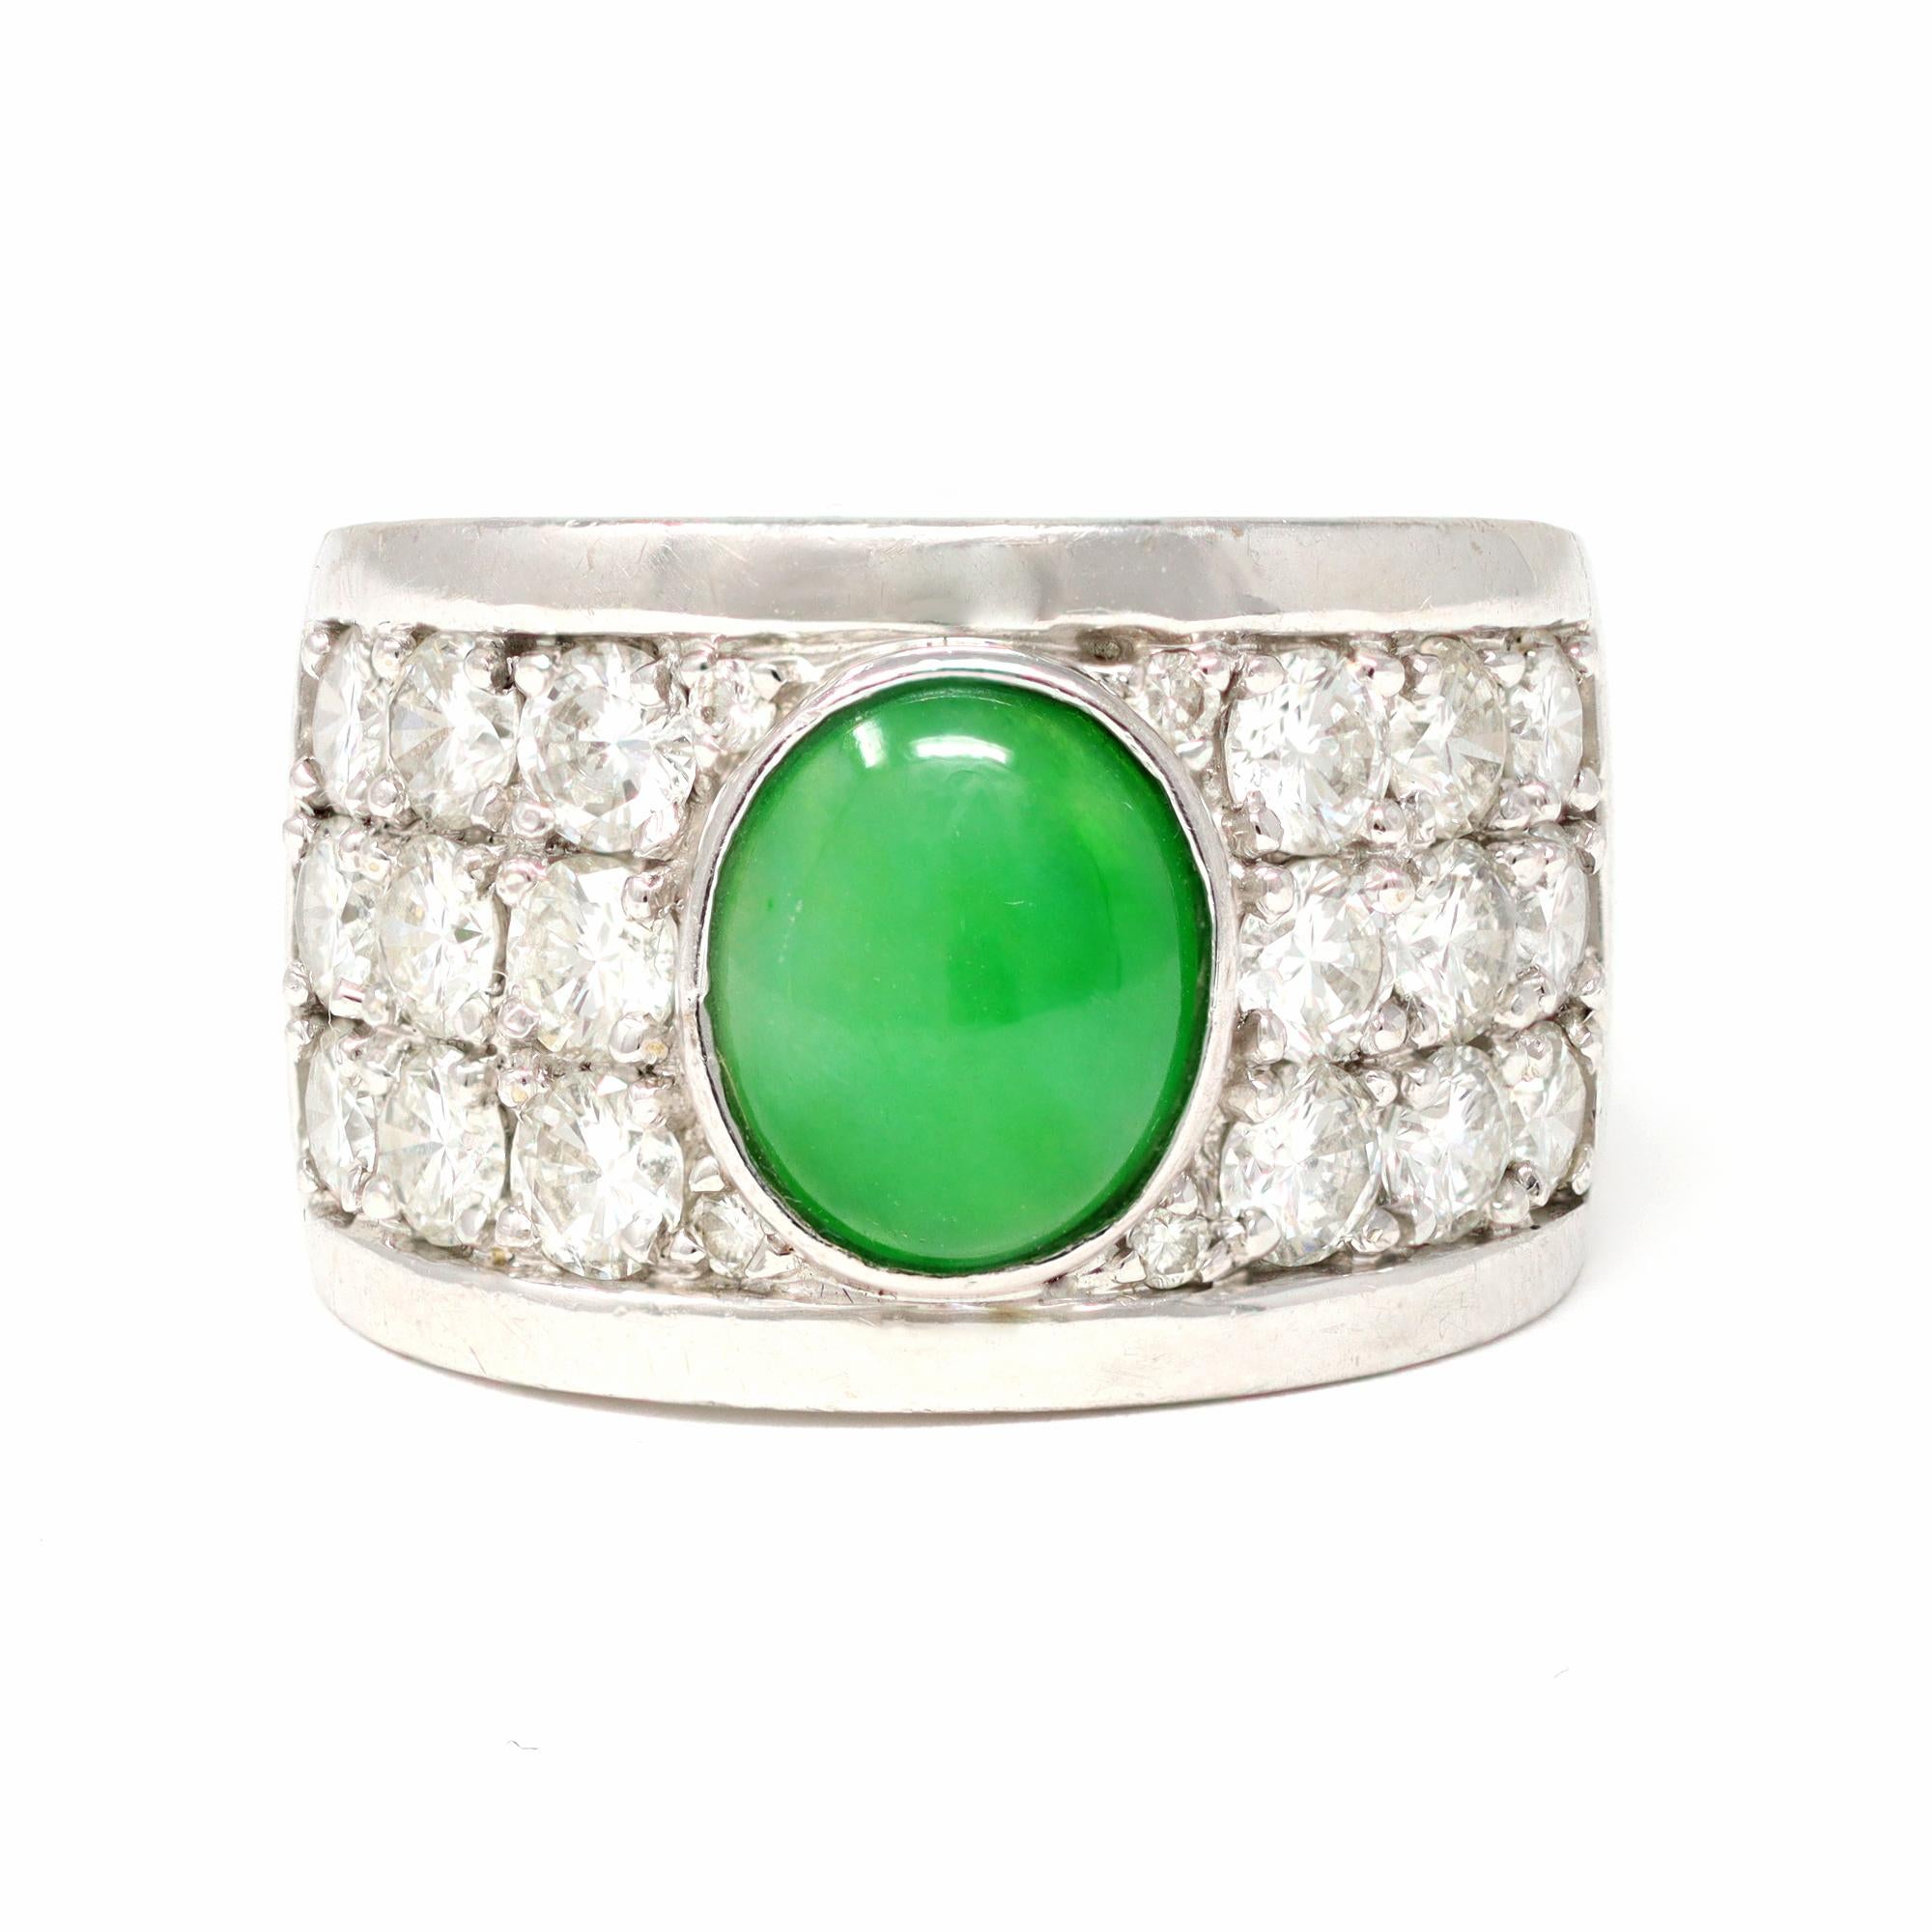 The large band circa 1980 features a natural apple green Jadeite jade cabochon in its center and is surrounded by diamonds set in pavé fashion. The jade cabochon measures 7.5 millimeters wide and 9.2 millimeters long. It is natural with no